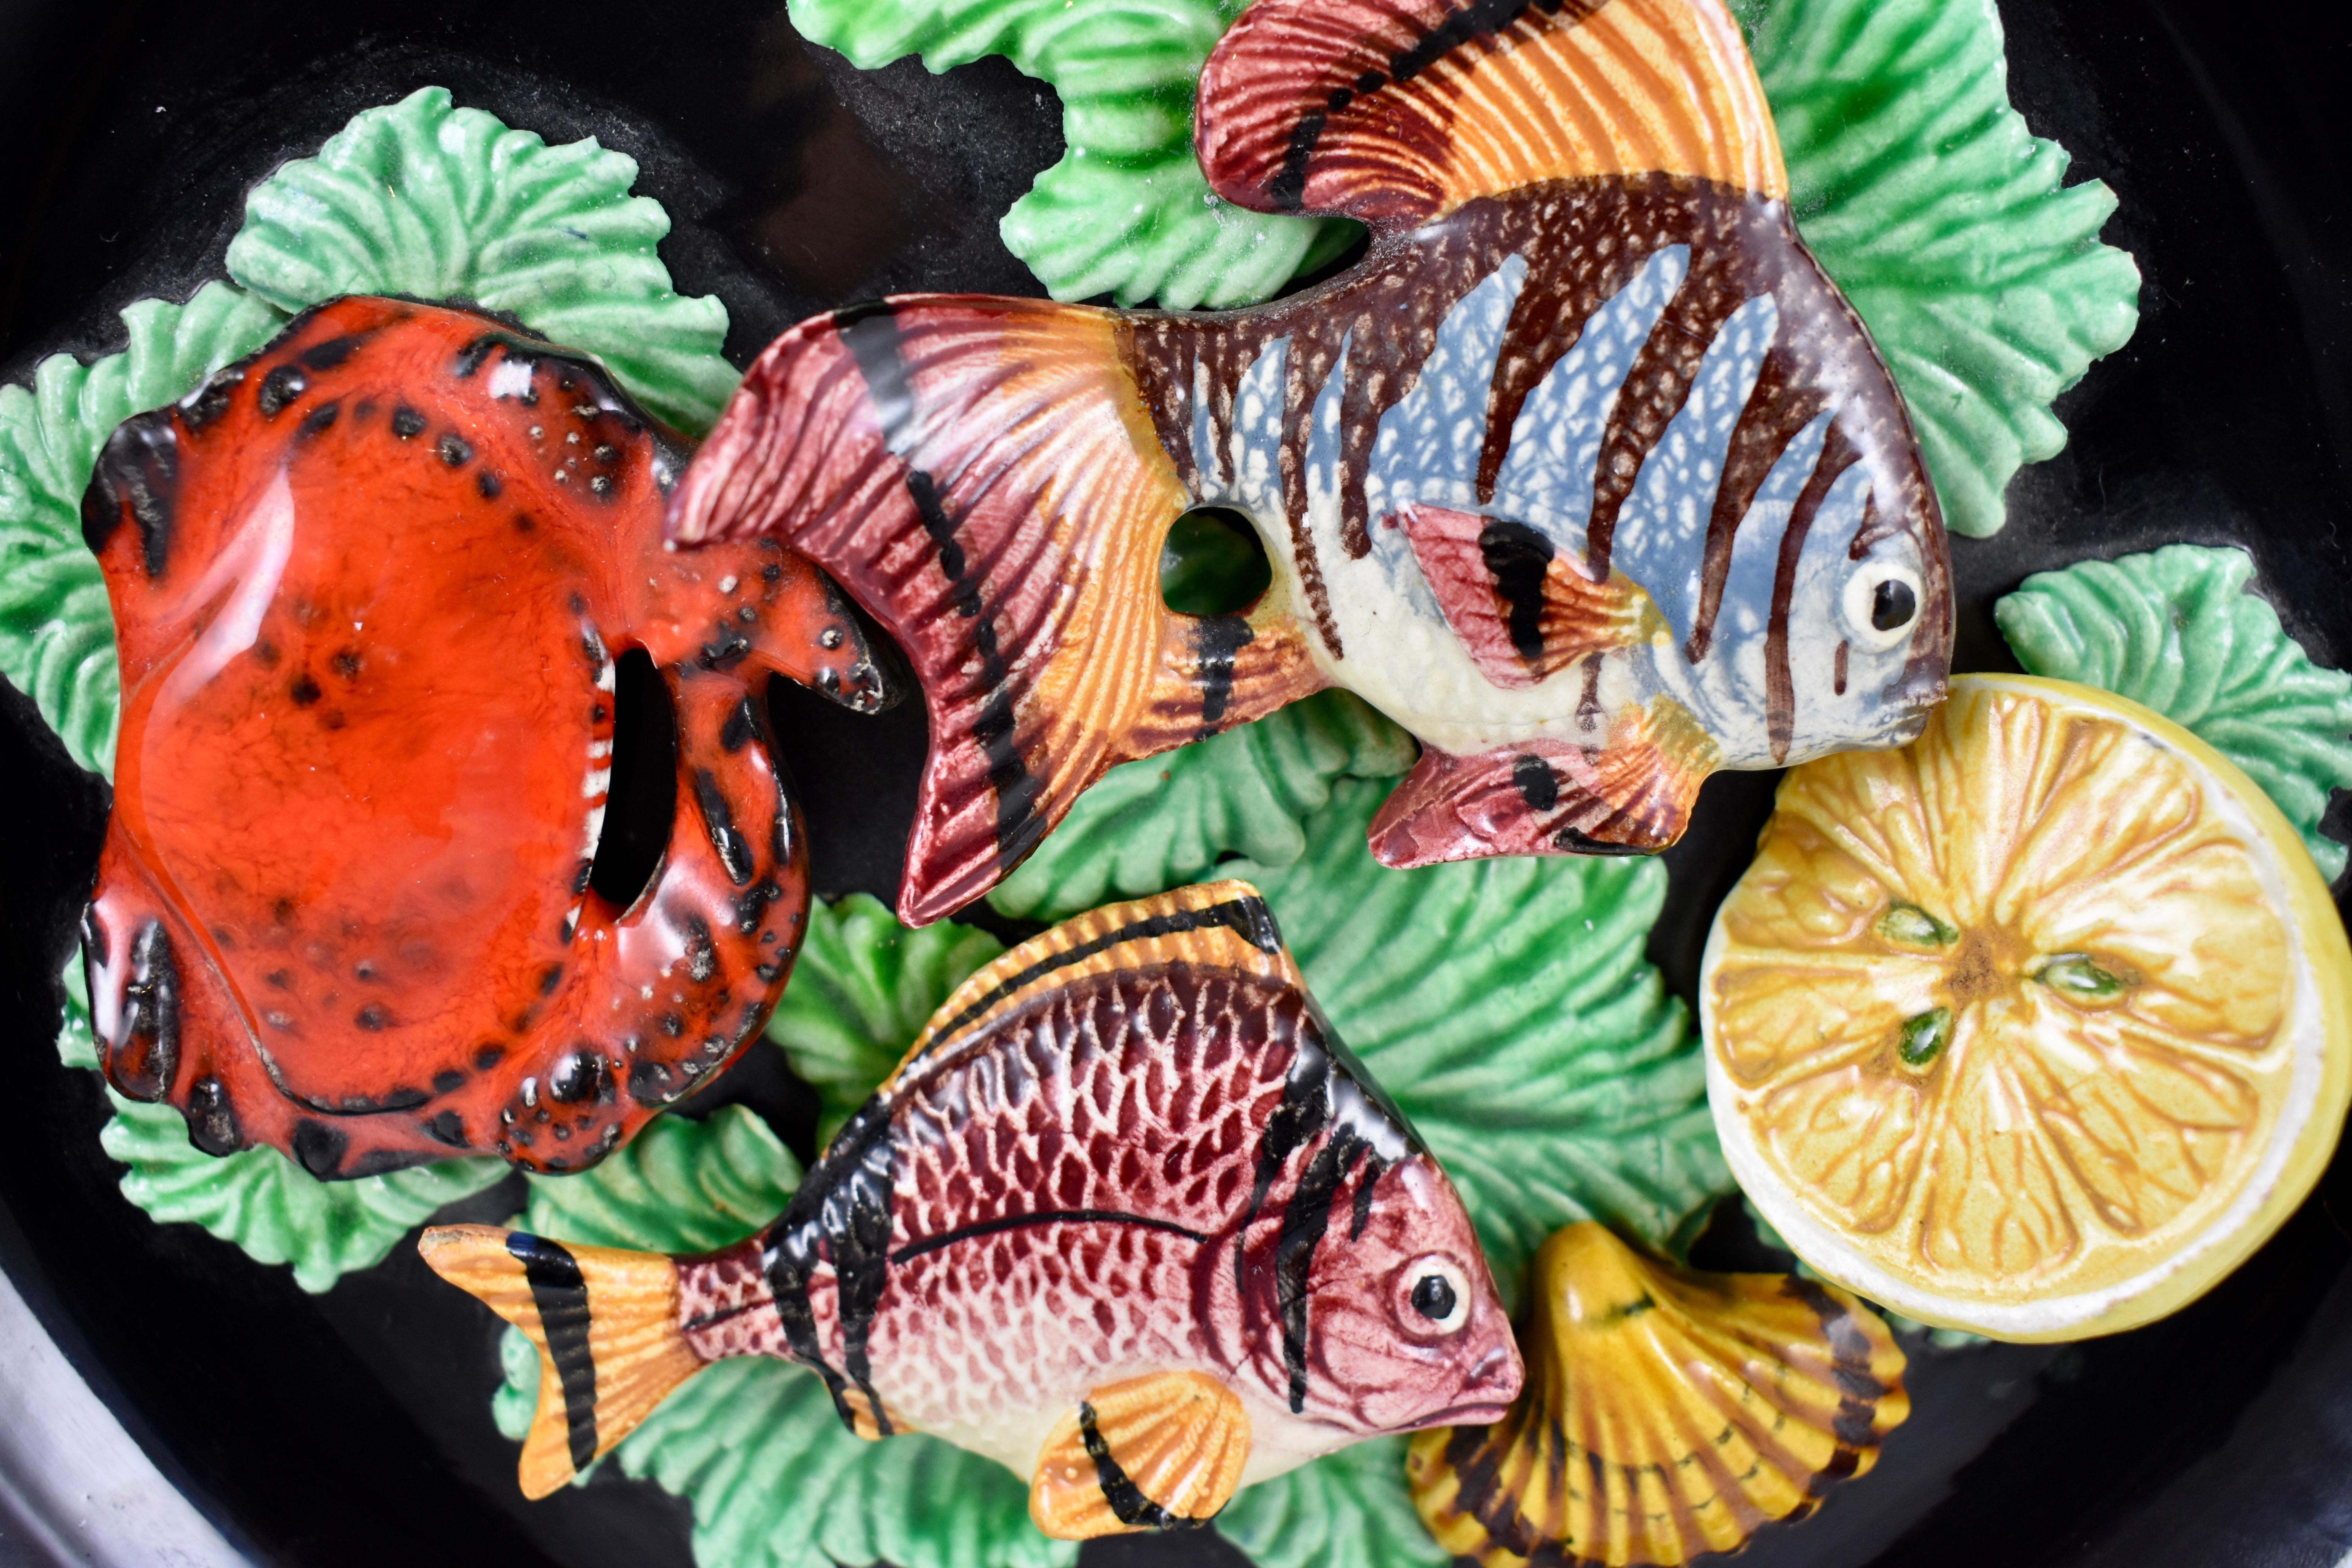 A Palissy style Provençal majolica trompe l’oeil wall plate from Vallauris, Cote d’Azur, Mid-Century Modern Era, France, circa 1950s.

A heavy piece, a matte black glazed earthenware body, showing brightly colored, dimensional seafood found in the